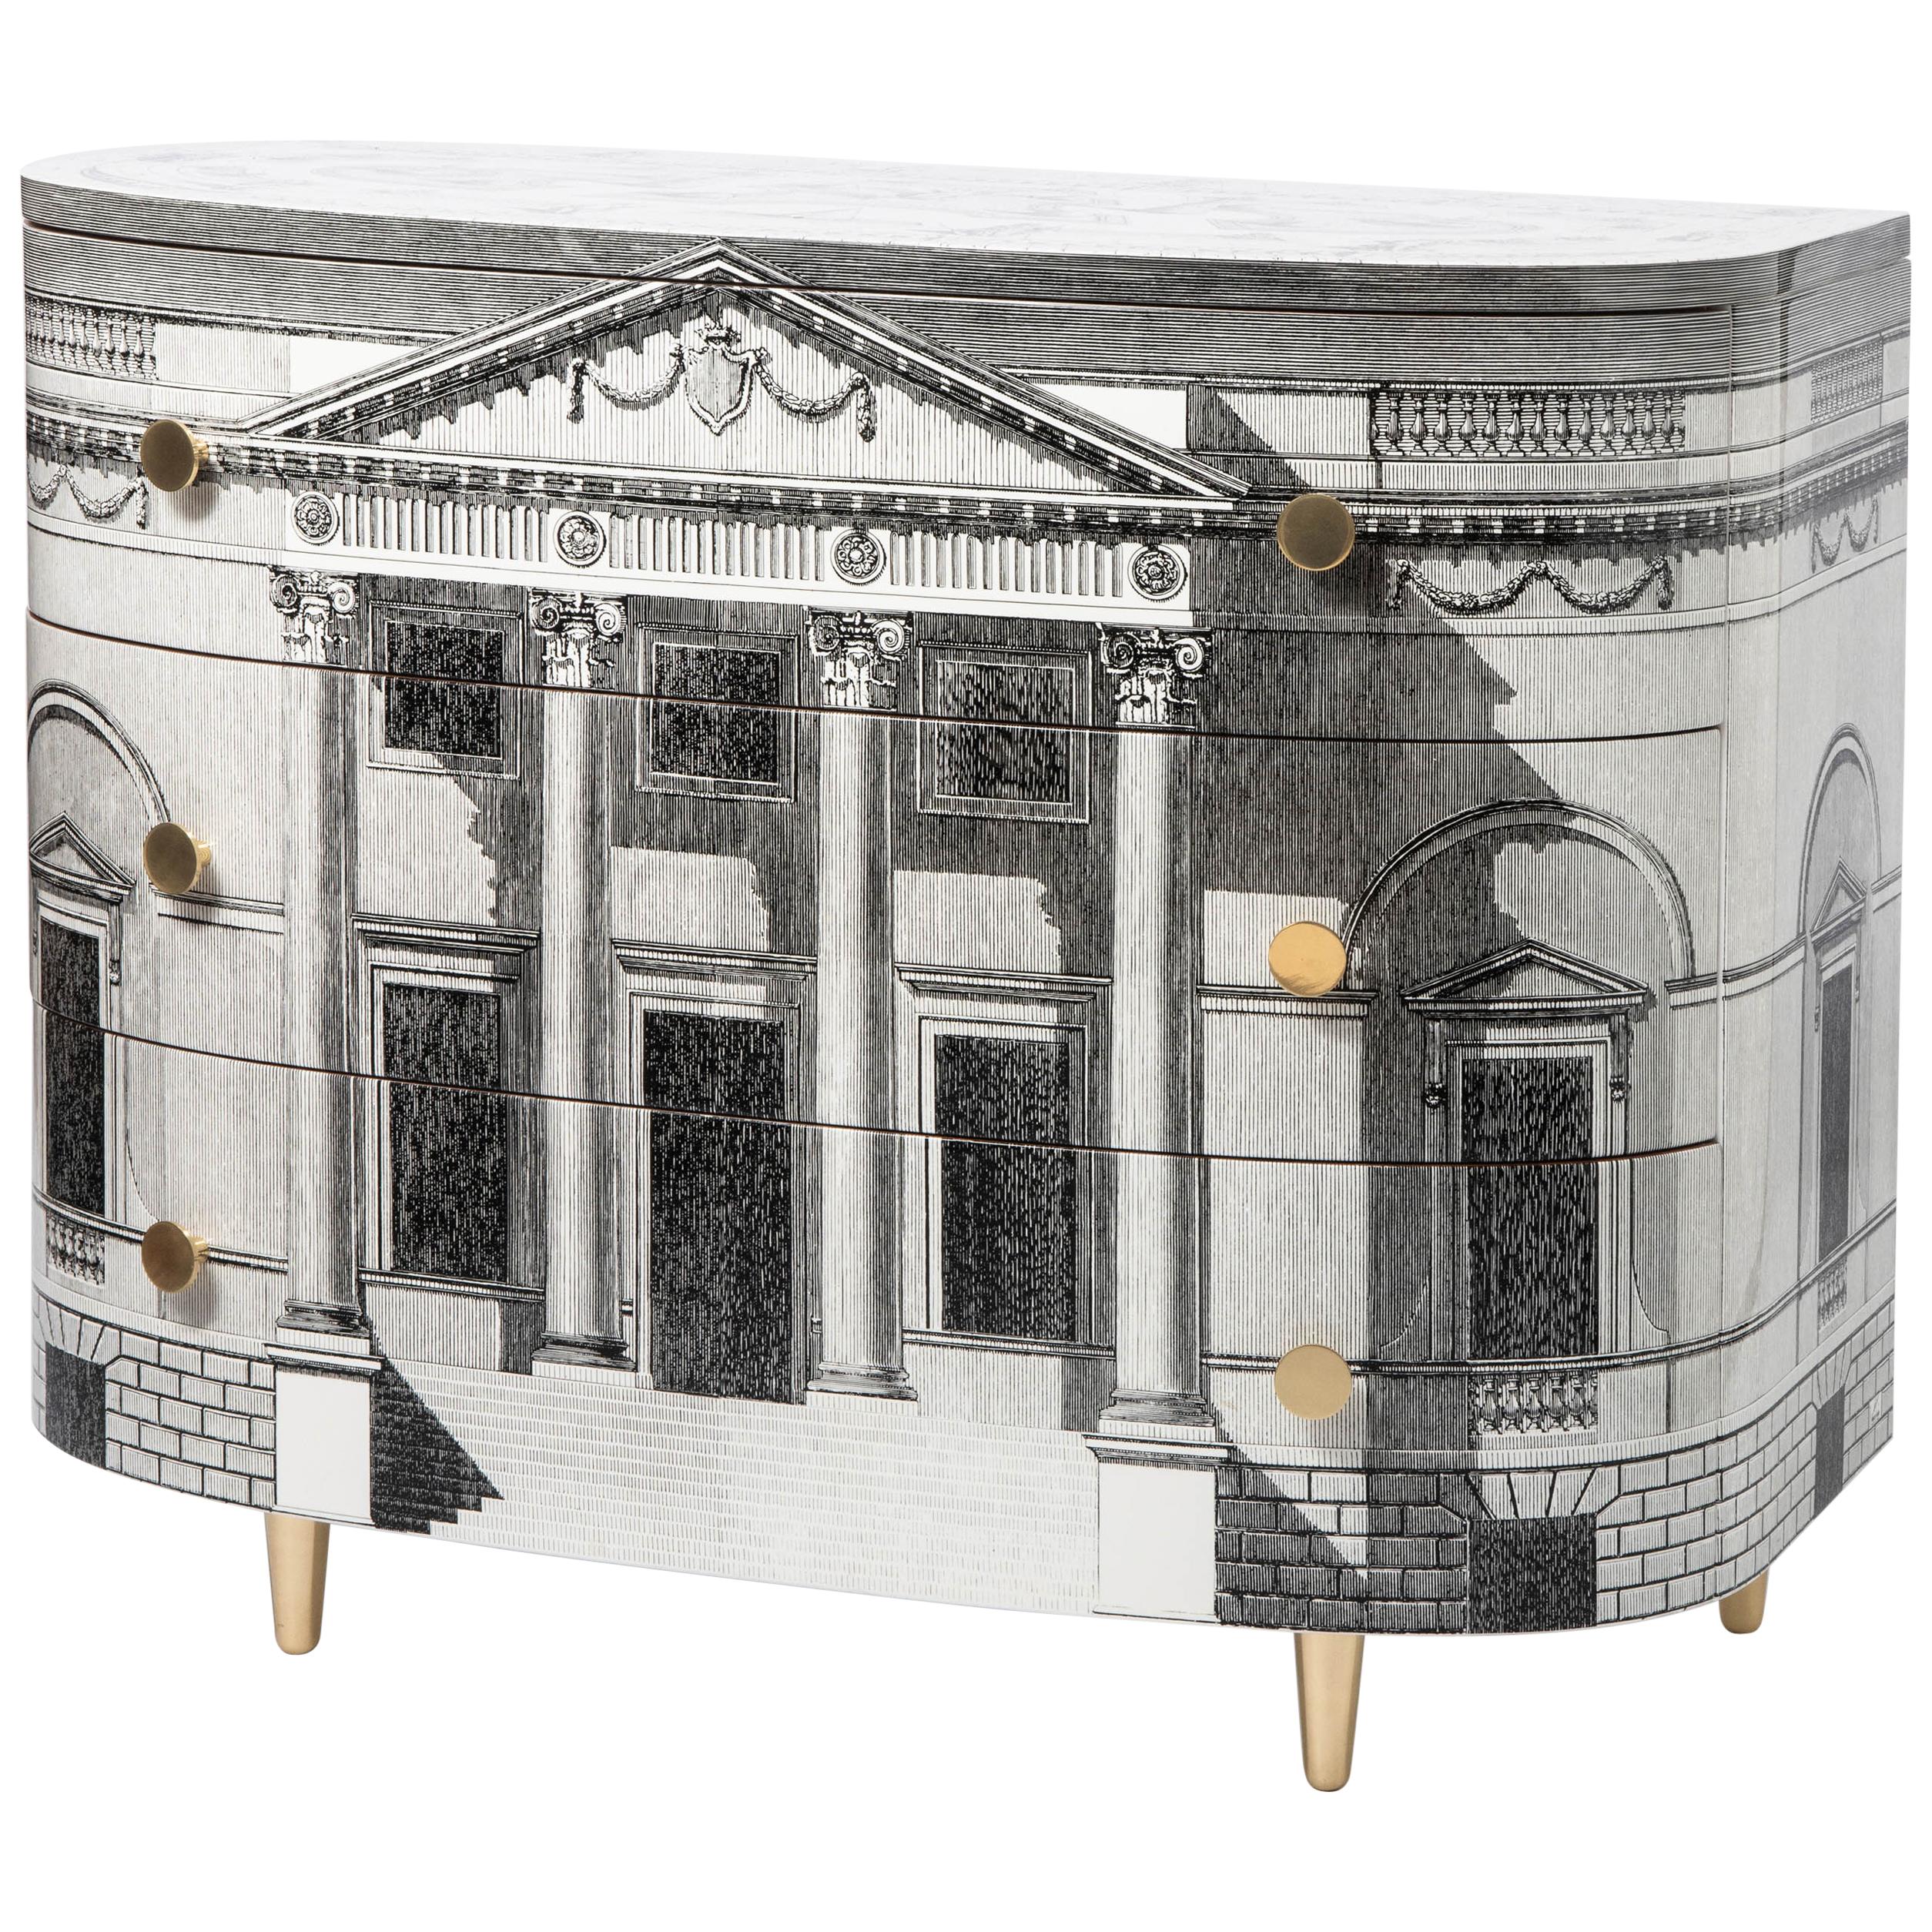 Barnaba Fornasetti Curved “Palladiana” Commode with Three Drawers, Italy, 2017